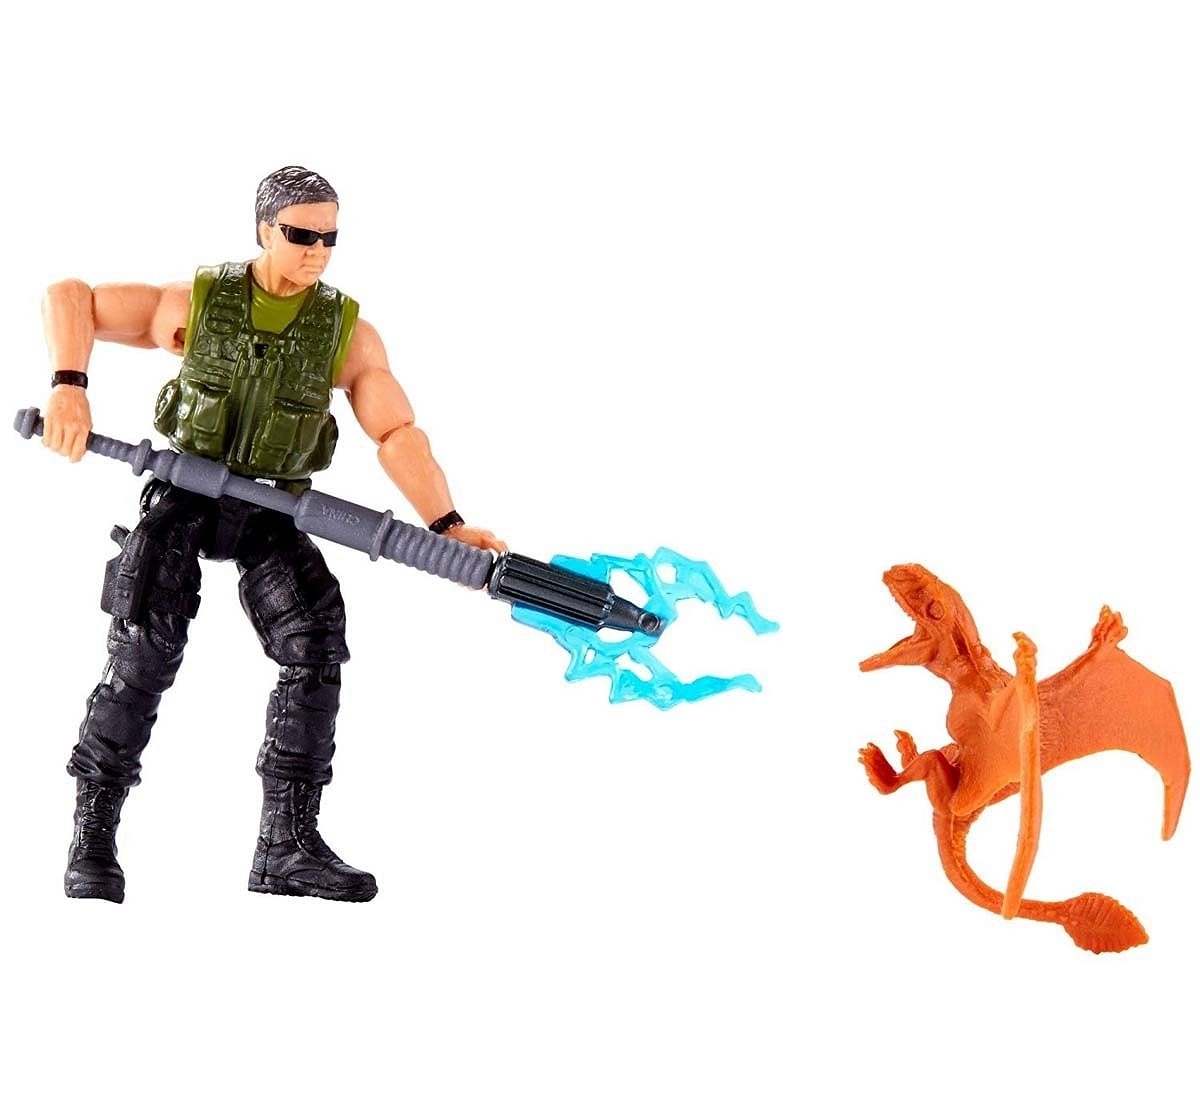 Jurassic World Action Products Mercenary Tranquilizer Action Figures for Kids age 4Y+, Assorted